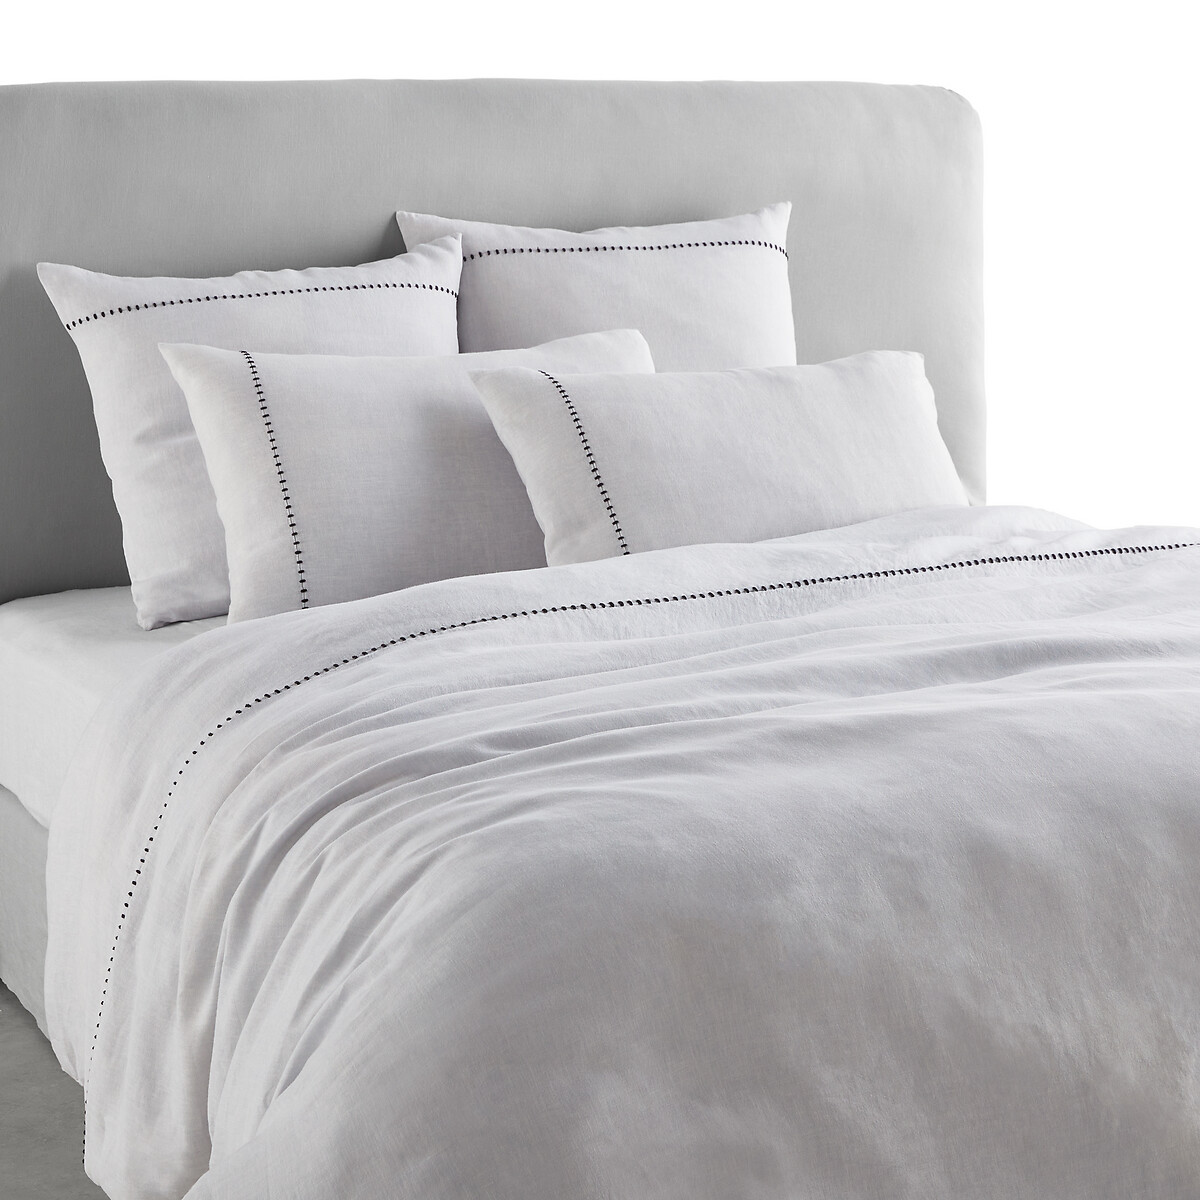 Cavallo 100% Washed Linen Duvet Cover